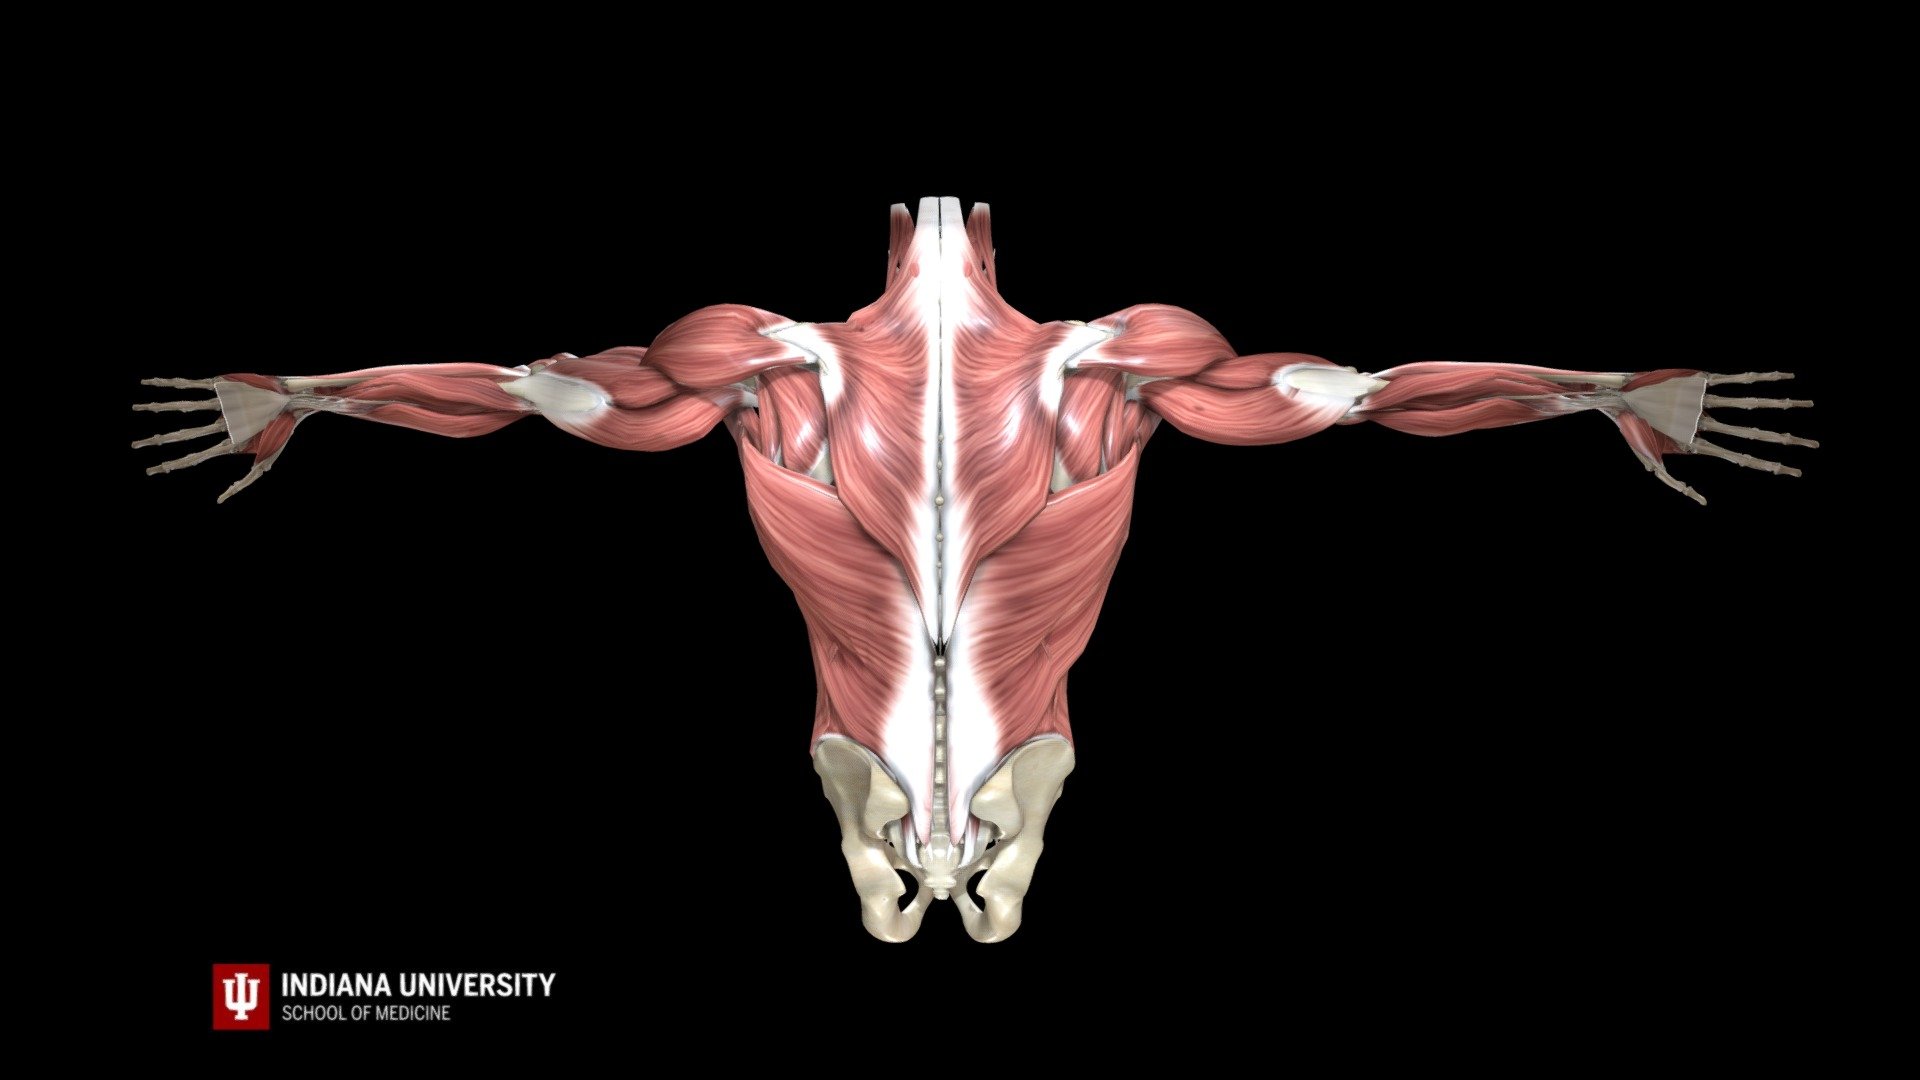 The empty can test (Jobe's test) and full can test (Neer test) are used to diagnose shoulder injuries. Specifically, these physical examination maneuvers examine the integrity of the supraspinatus muscle and tendon.

©Indiana University Board of Trustees. This project was funded by a grant from the Indiana University School of Medicine Program to Launch those Underrepresented in Medicine toward Success (PLUS) and the Medical Student Education Division of the Indiana University School of Medicine, Department of Family Medicine. 3D imaging created by Luke Parker and Emma Parker 3d model